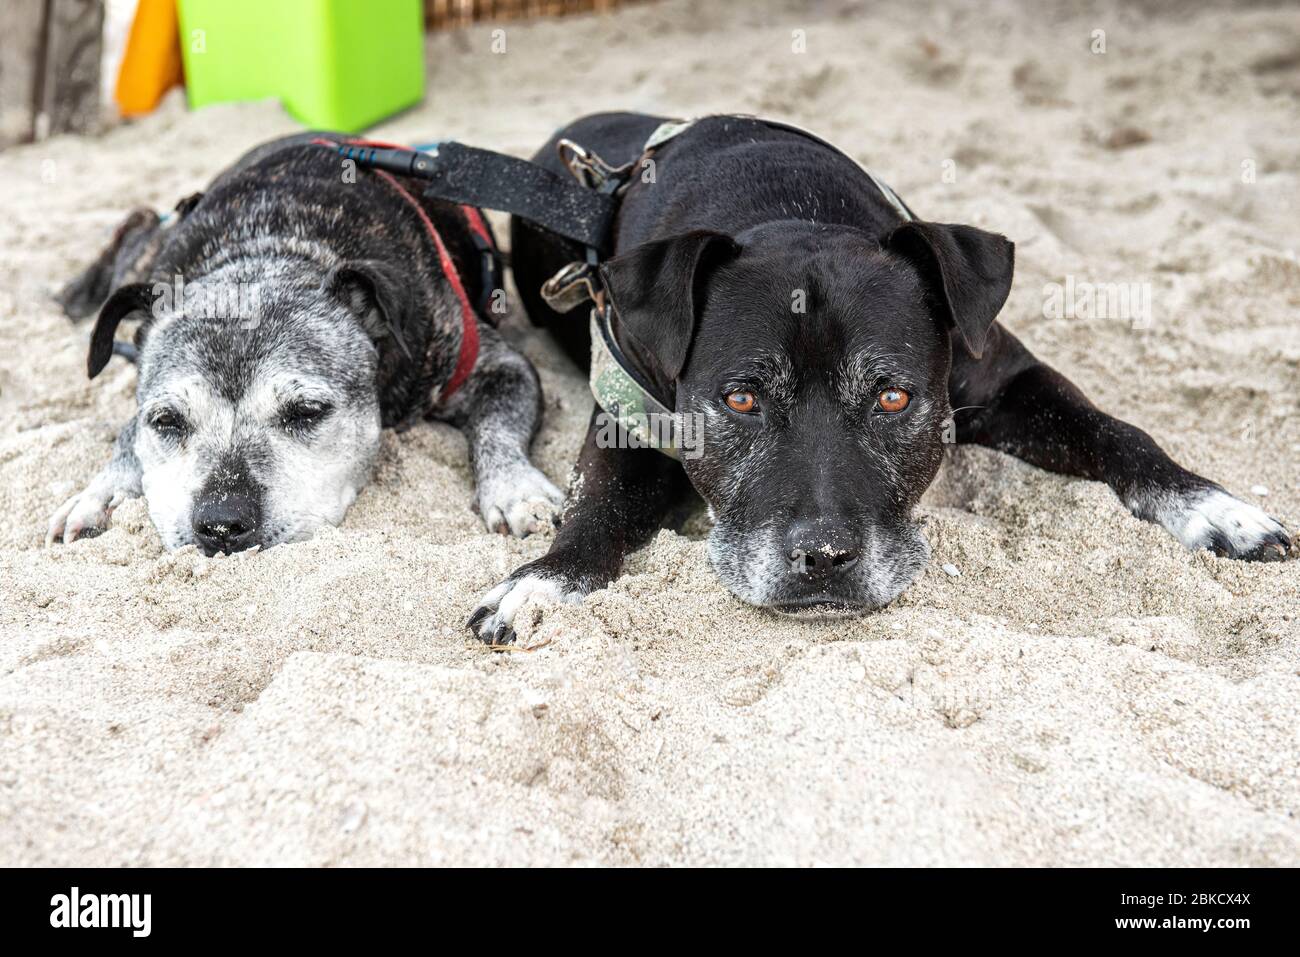 Ses Illetes Beach, Formentera, Balearic Islands, Spain. Two dogs are resting tenderly on the golden beach Stock Photo